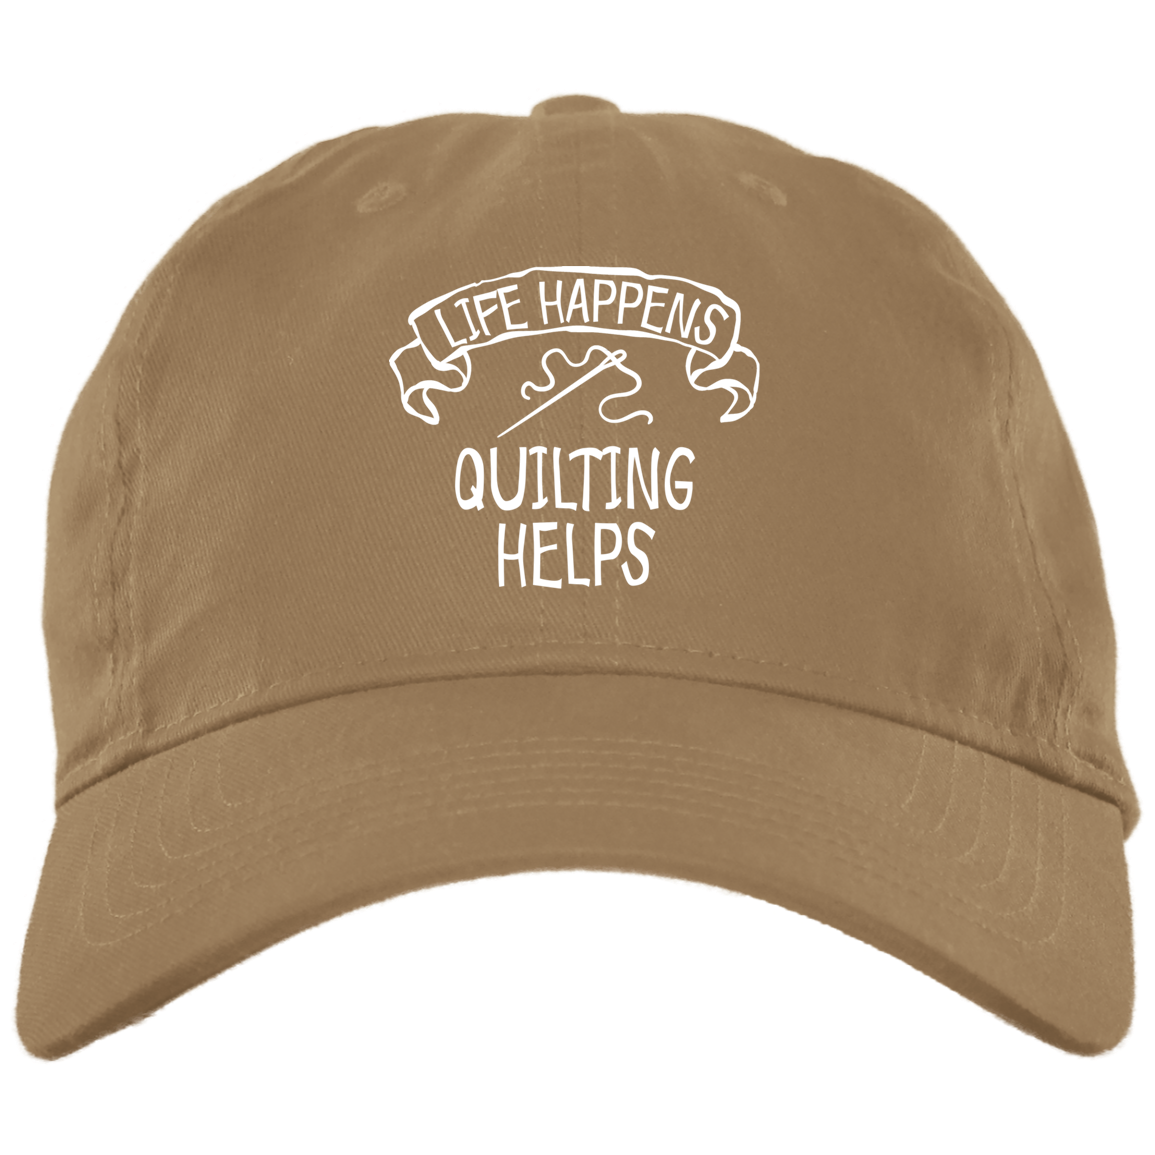 Life Happens - Quilting Helps Brushed Twill Unstructured Dad Cap